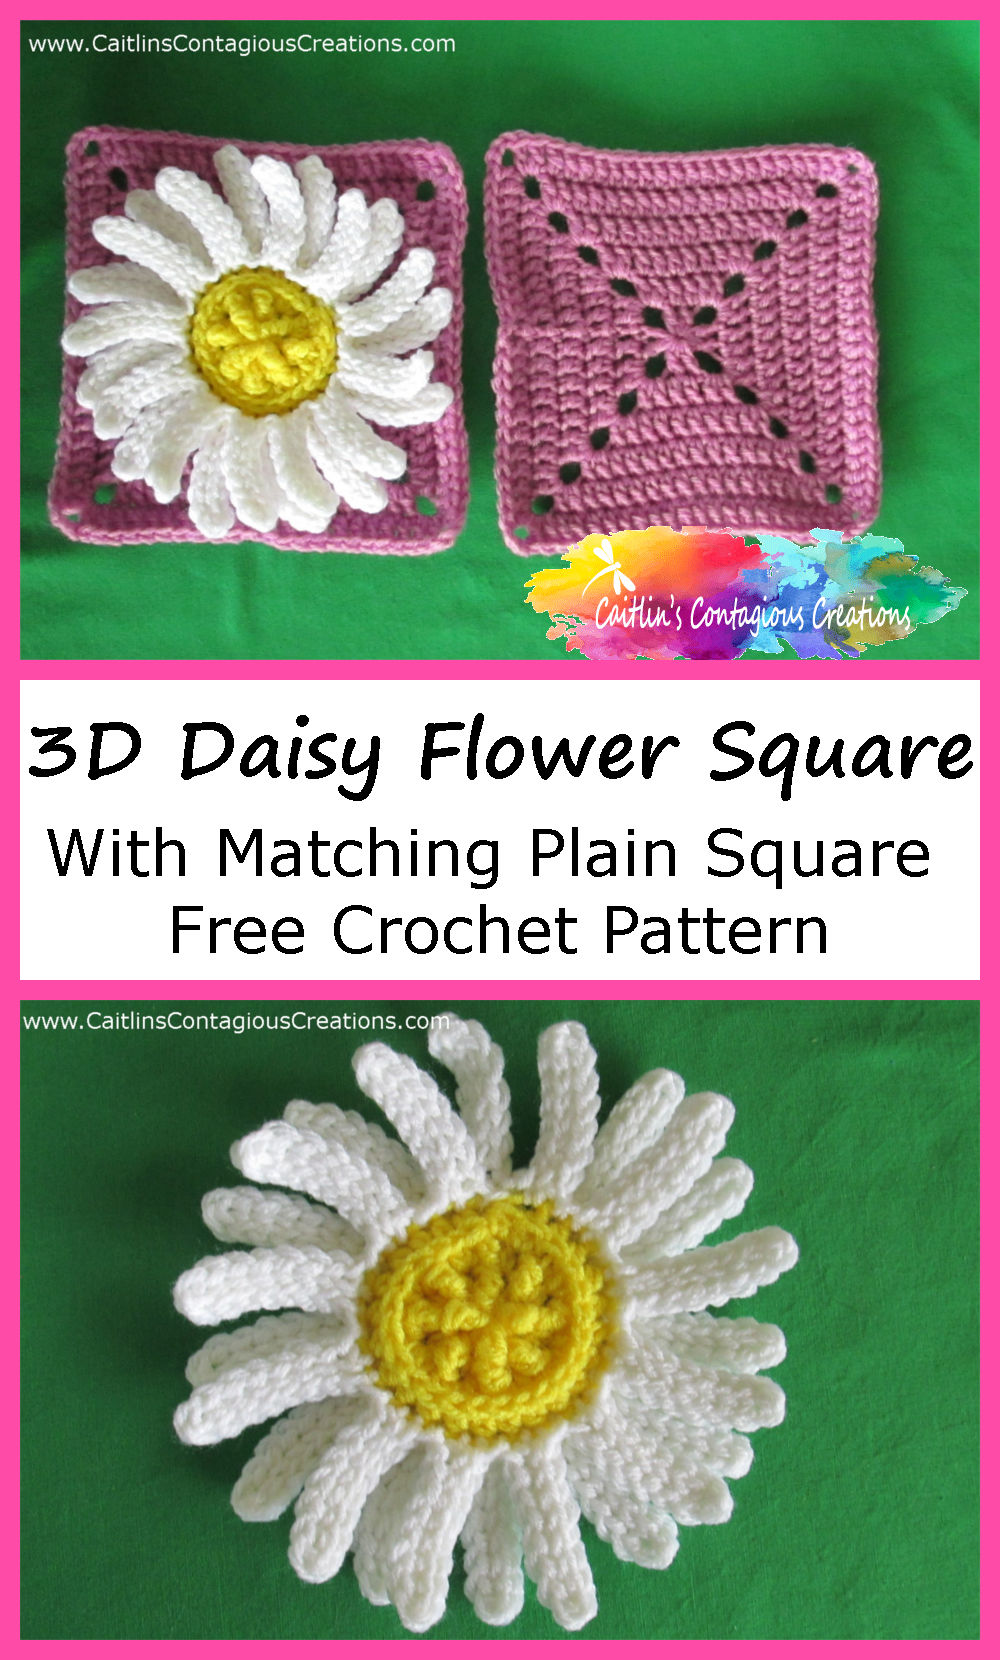 Pinable Image finished daisy square and matching plain square on green background with text overlay 3D daisy flower square with matching plain square free crochet pattern and Caitlin's Contagious Creations logo